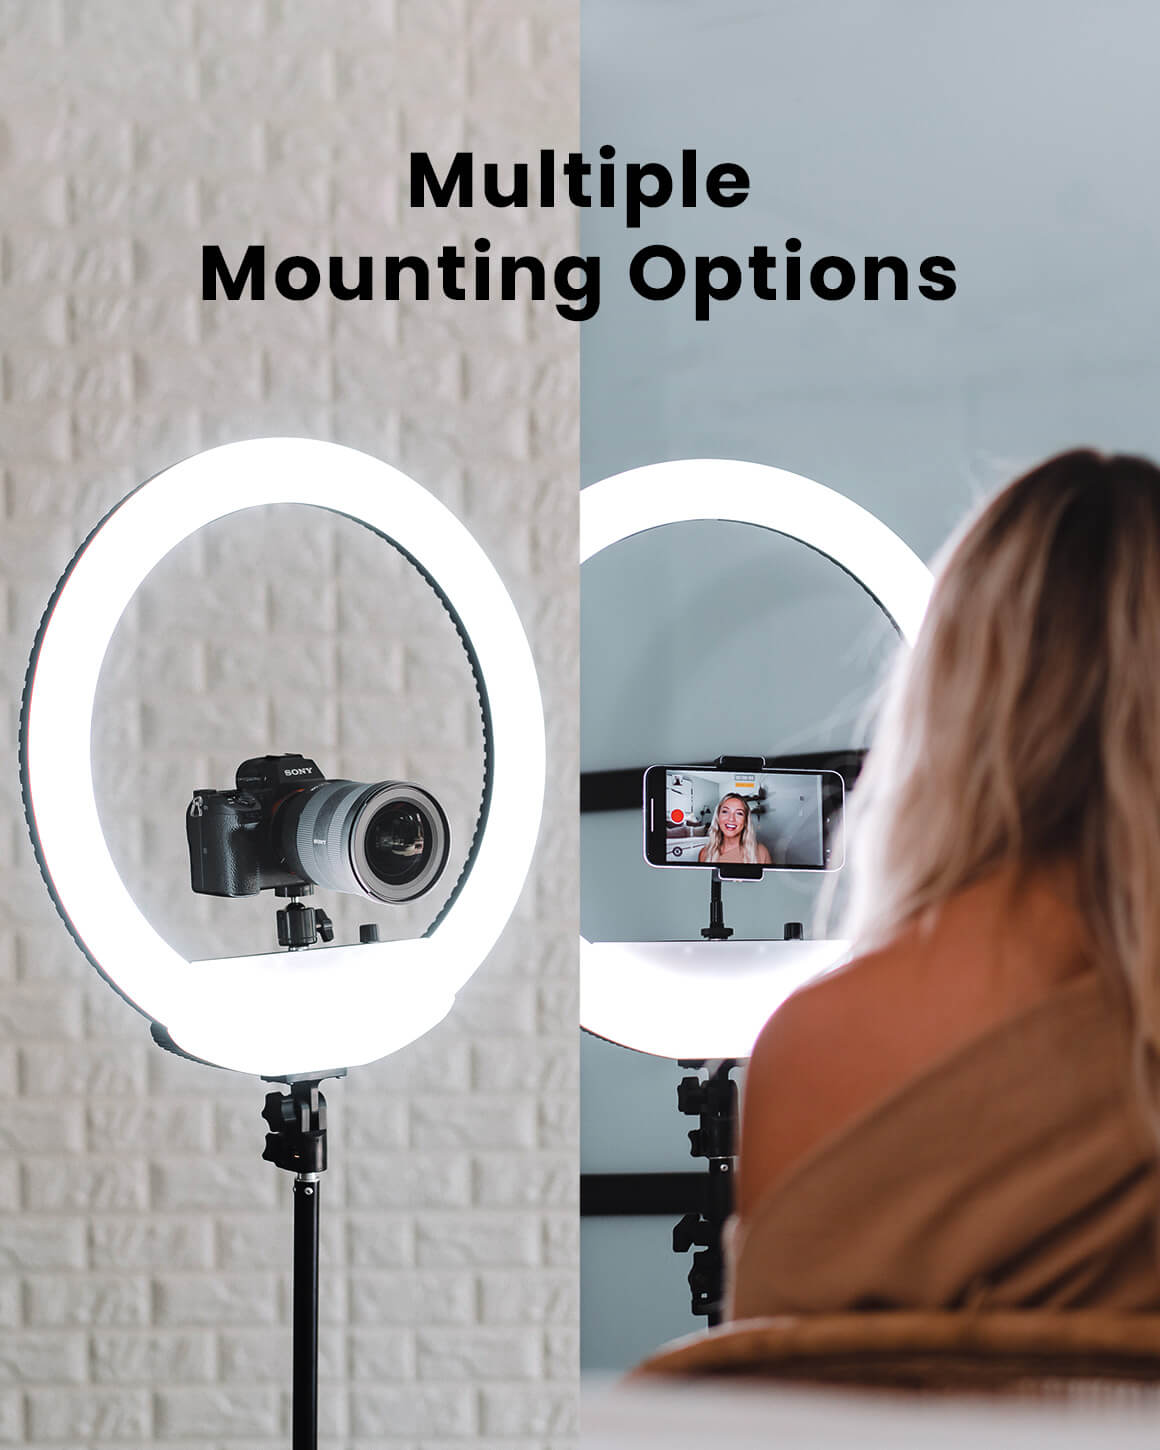 Images showing multiple mounting options for smartphones and DSLR cameras on the Lume Cube Cordless 18" Ring Light.